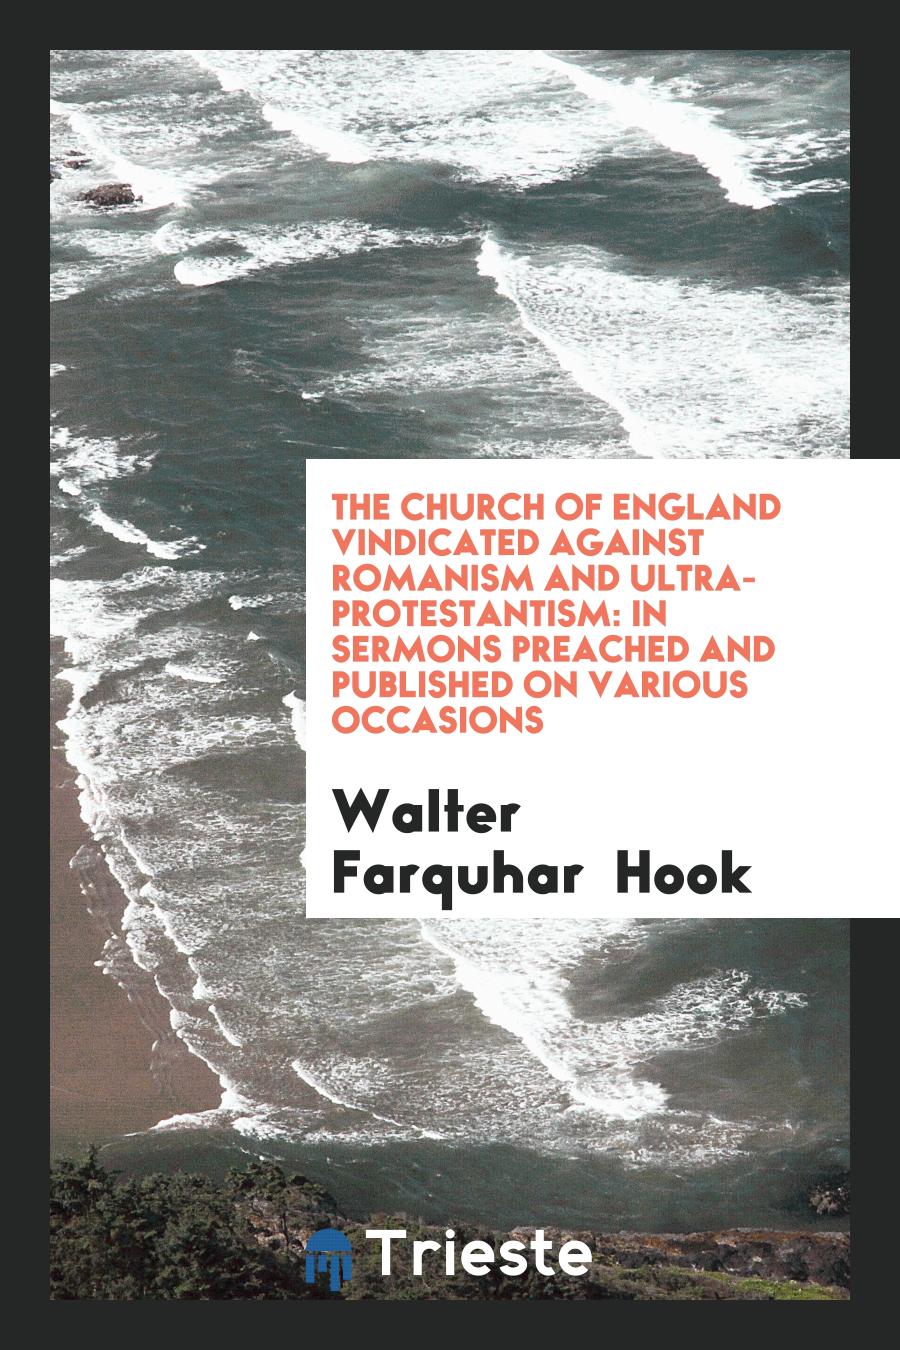 The Church of England Vindicated Against Romanism and Ultra-Protestantism: In Sermons Preached and Published on Various Occasions